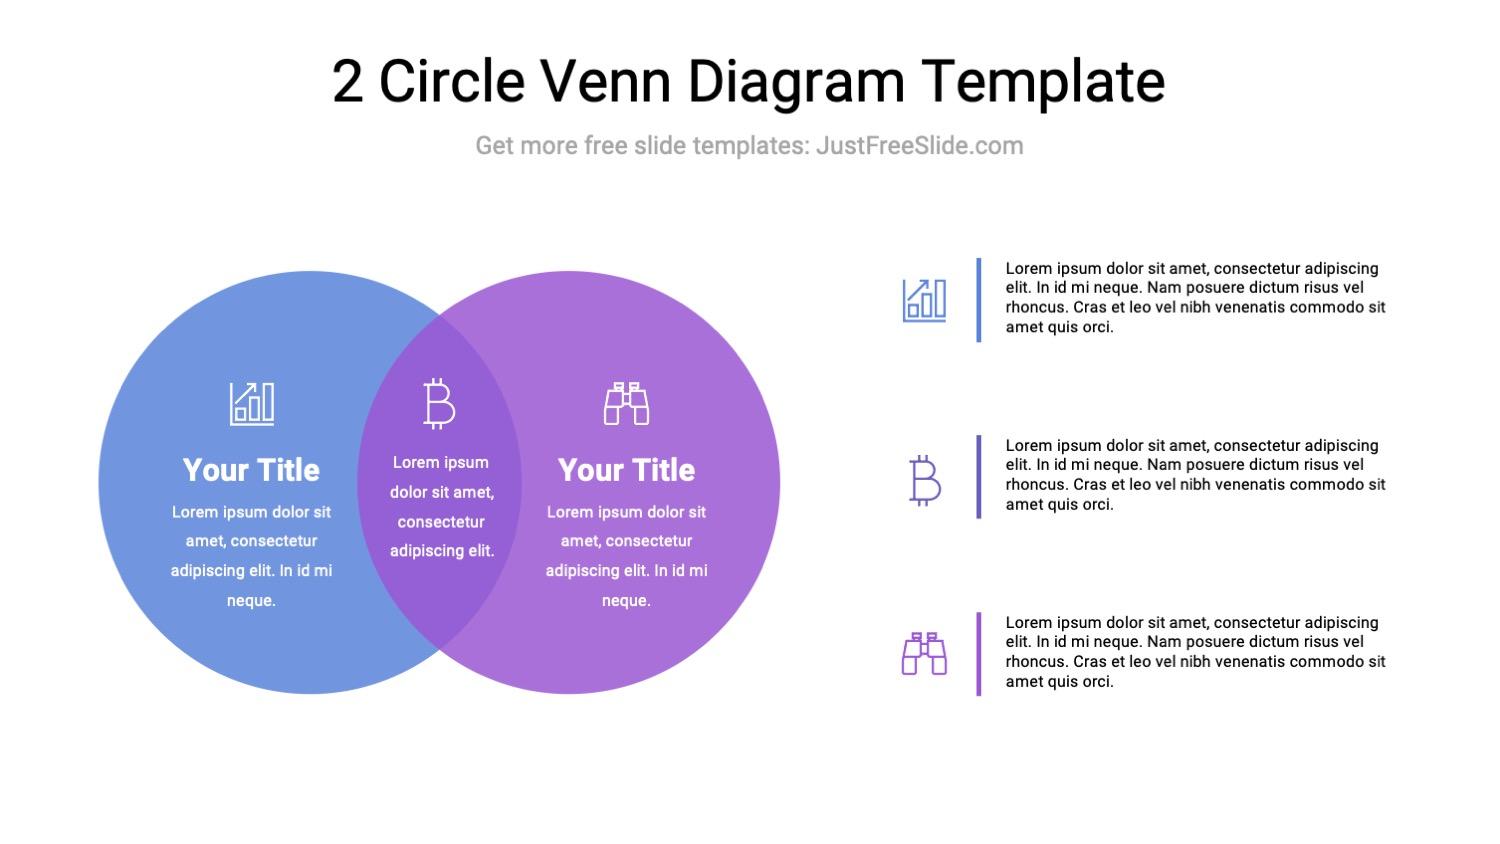 2 Circle Venn Diagram PPT template and Google Slides template with text